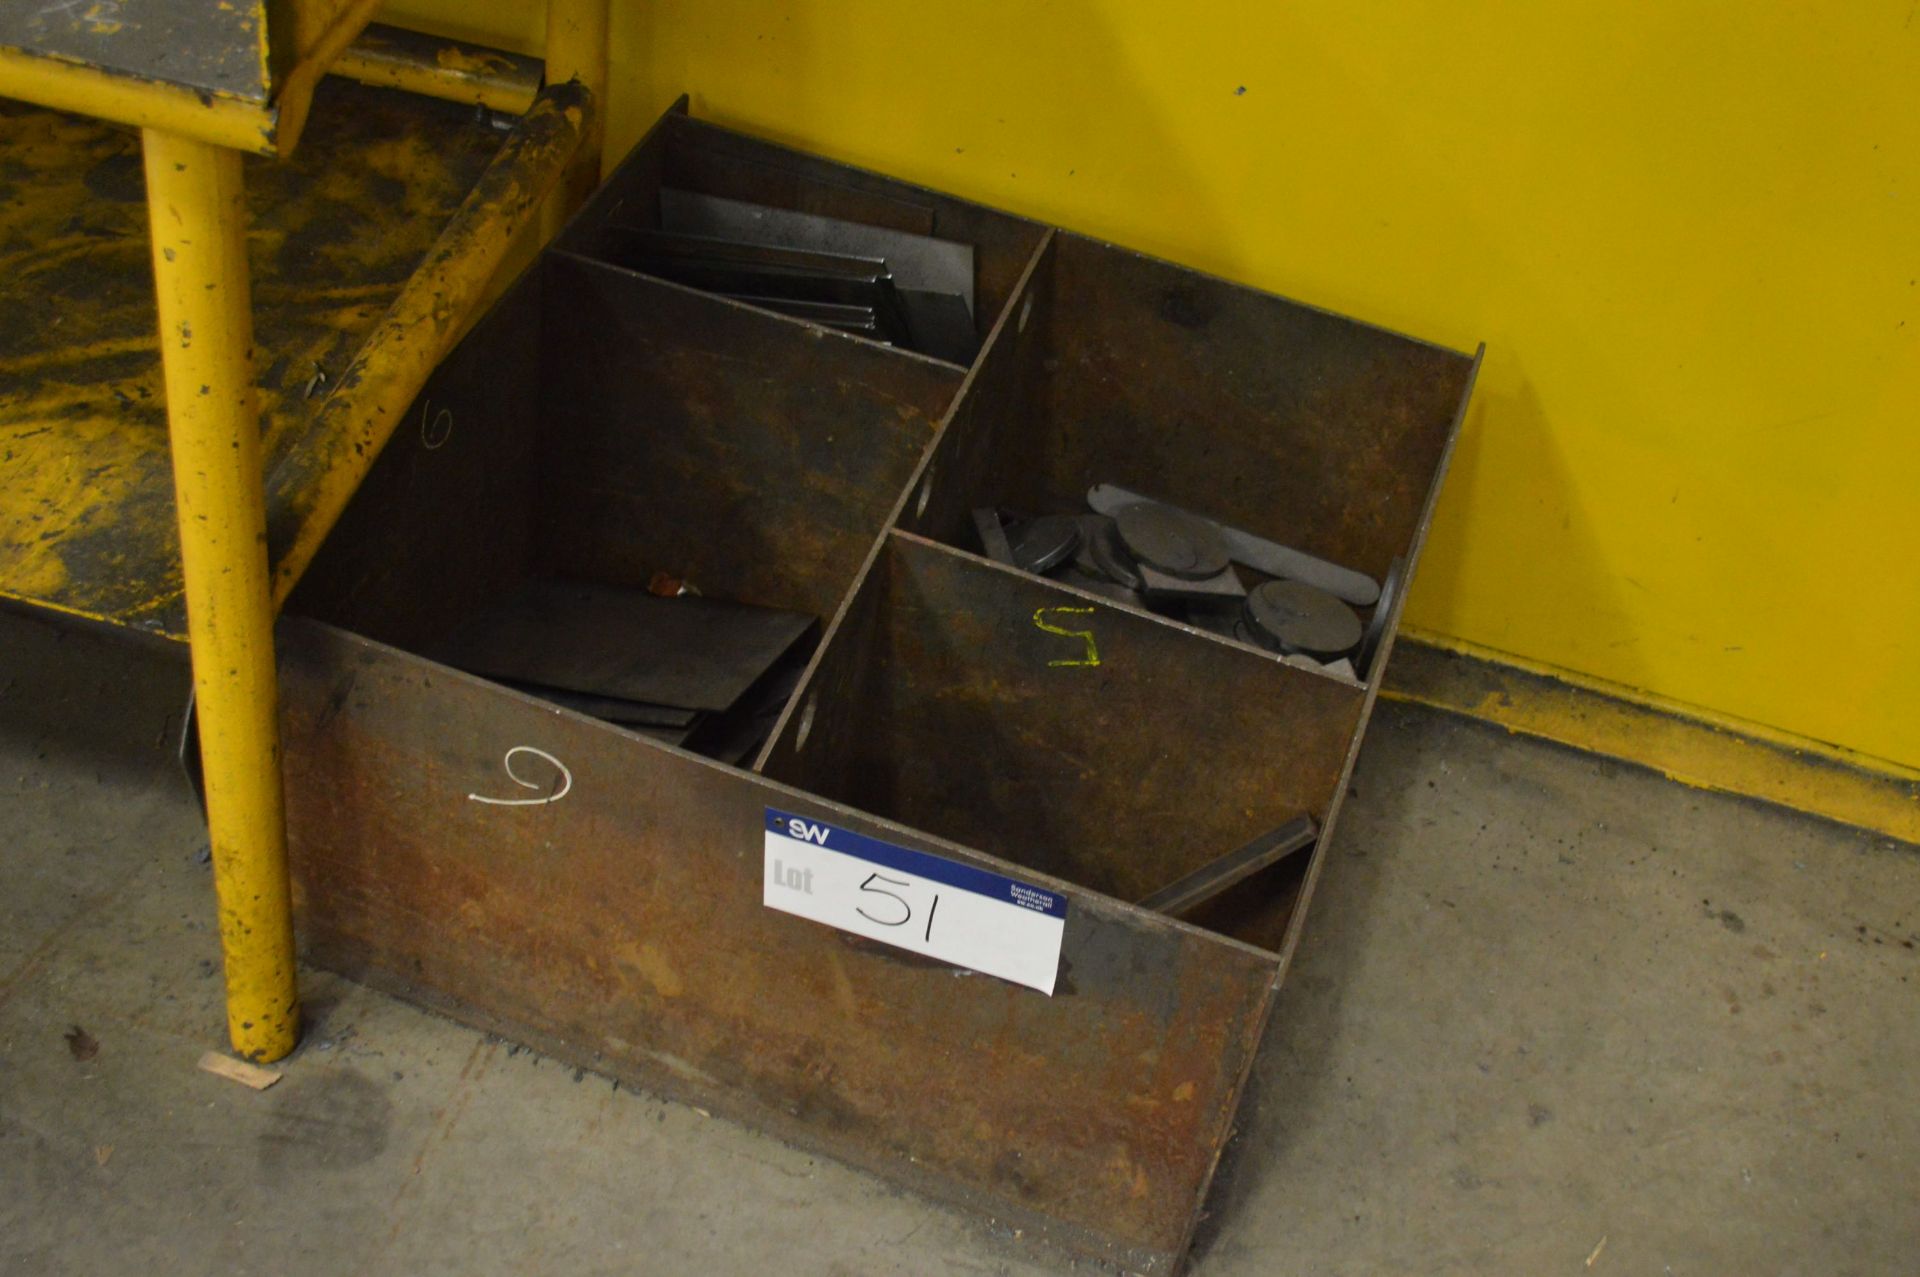 Fabricated Steel Four Compartment Bin, with contents including steel packers